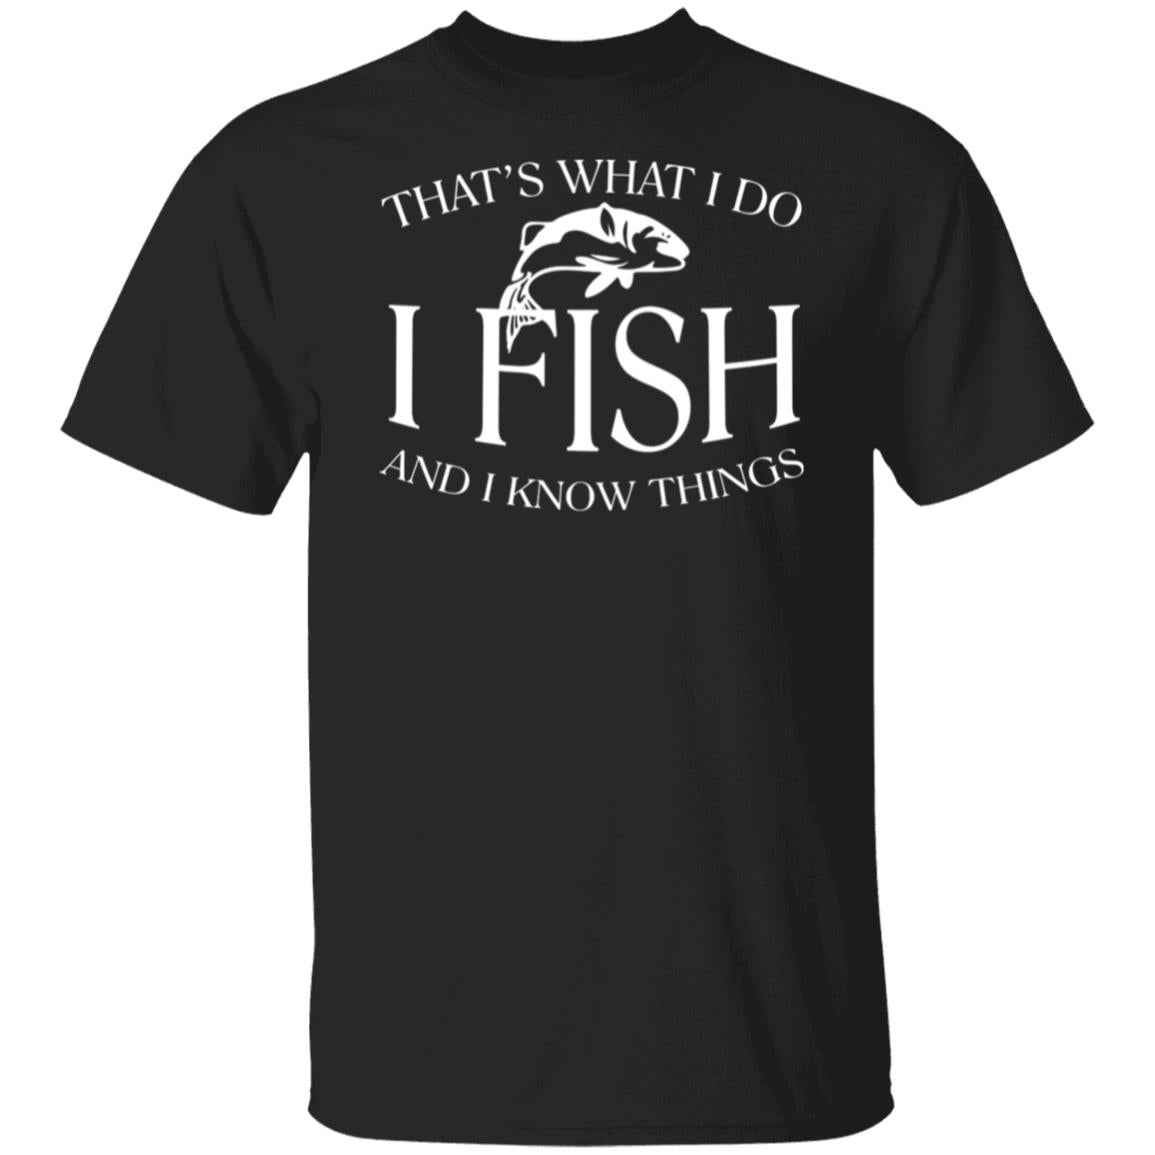 That's what I do I fish and I know things t-shirt black